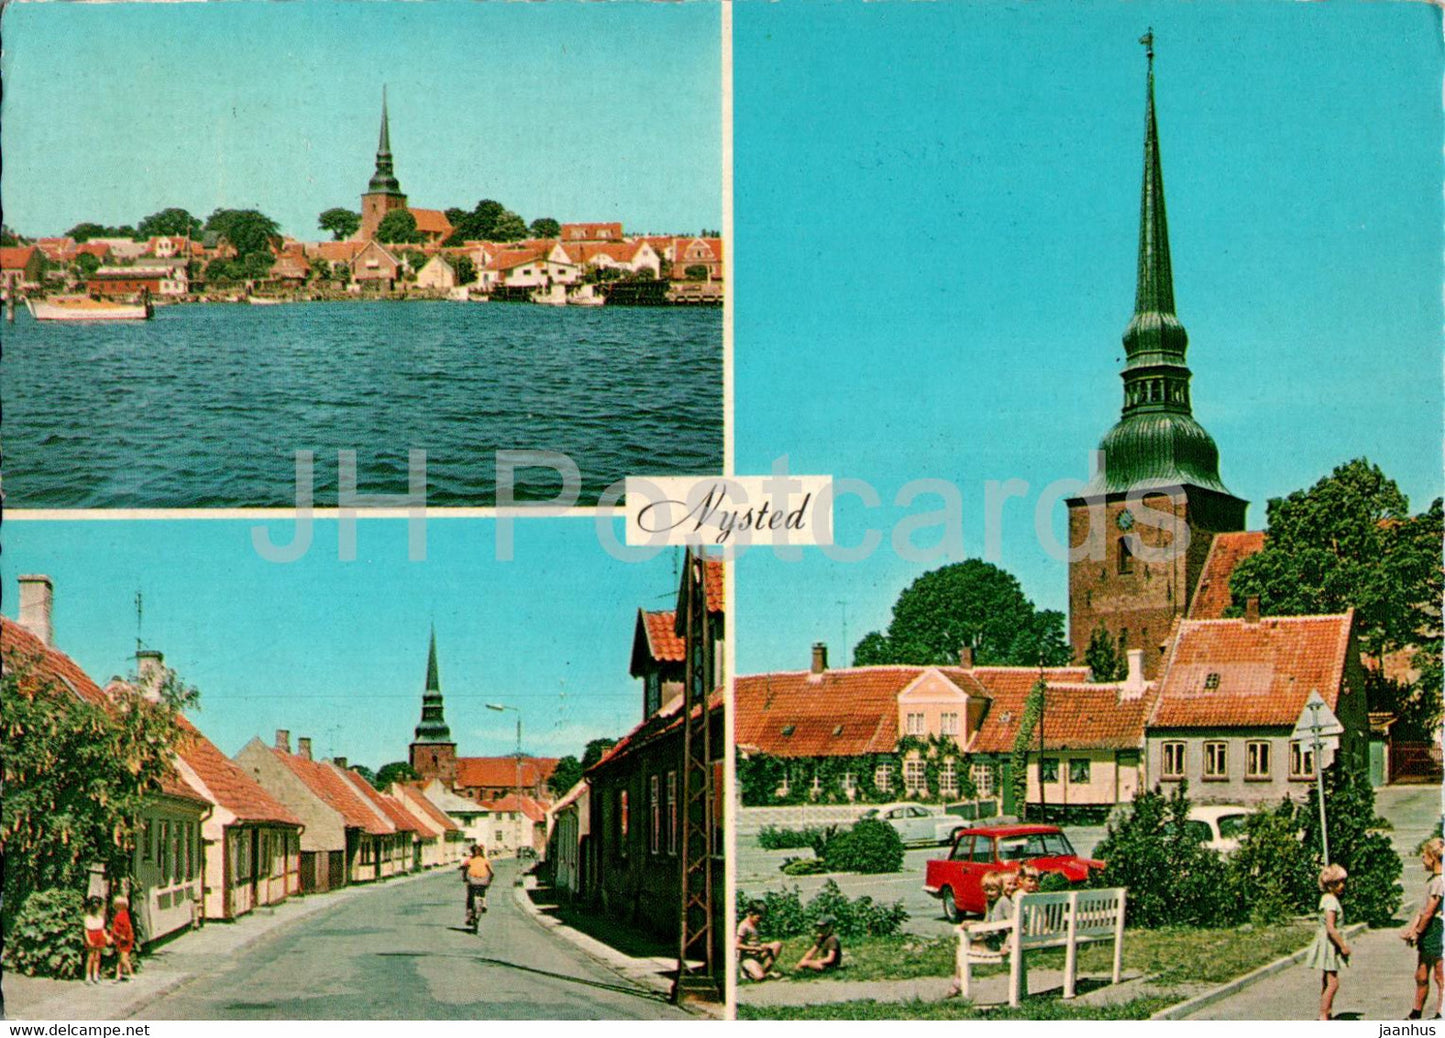 Nysted - Danmarks sydligste kobstad - The southernmost borough of Denmark - multiview - 1975 - Denmark - used - JH Postcards